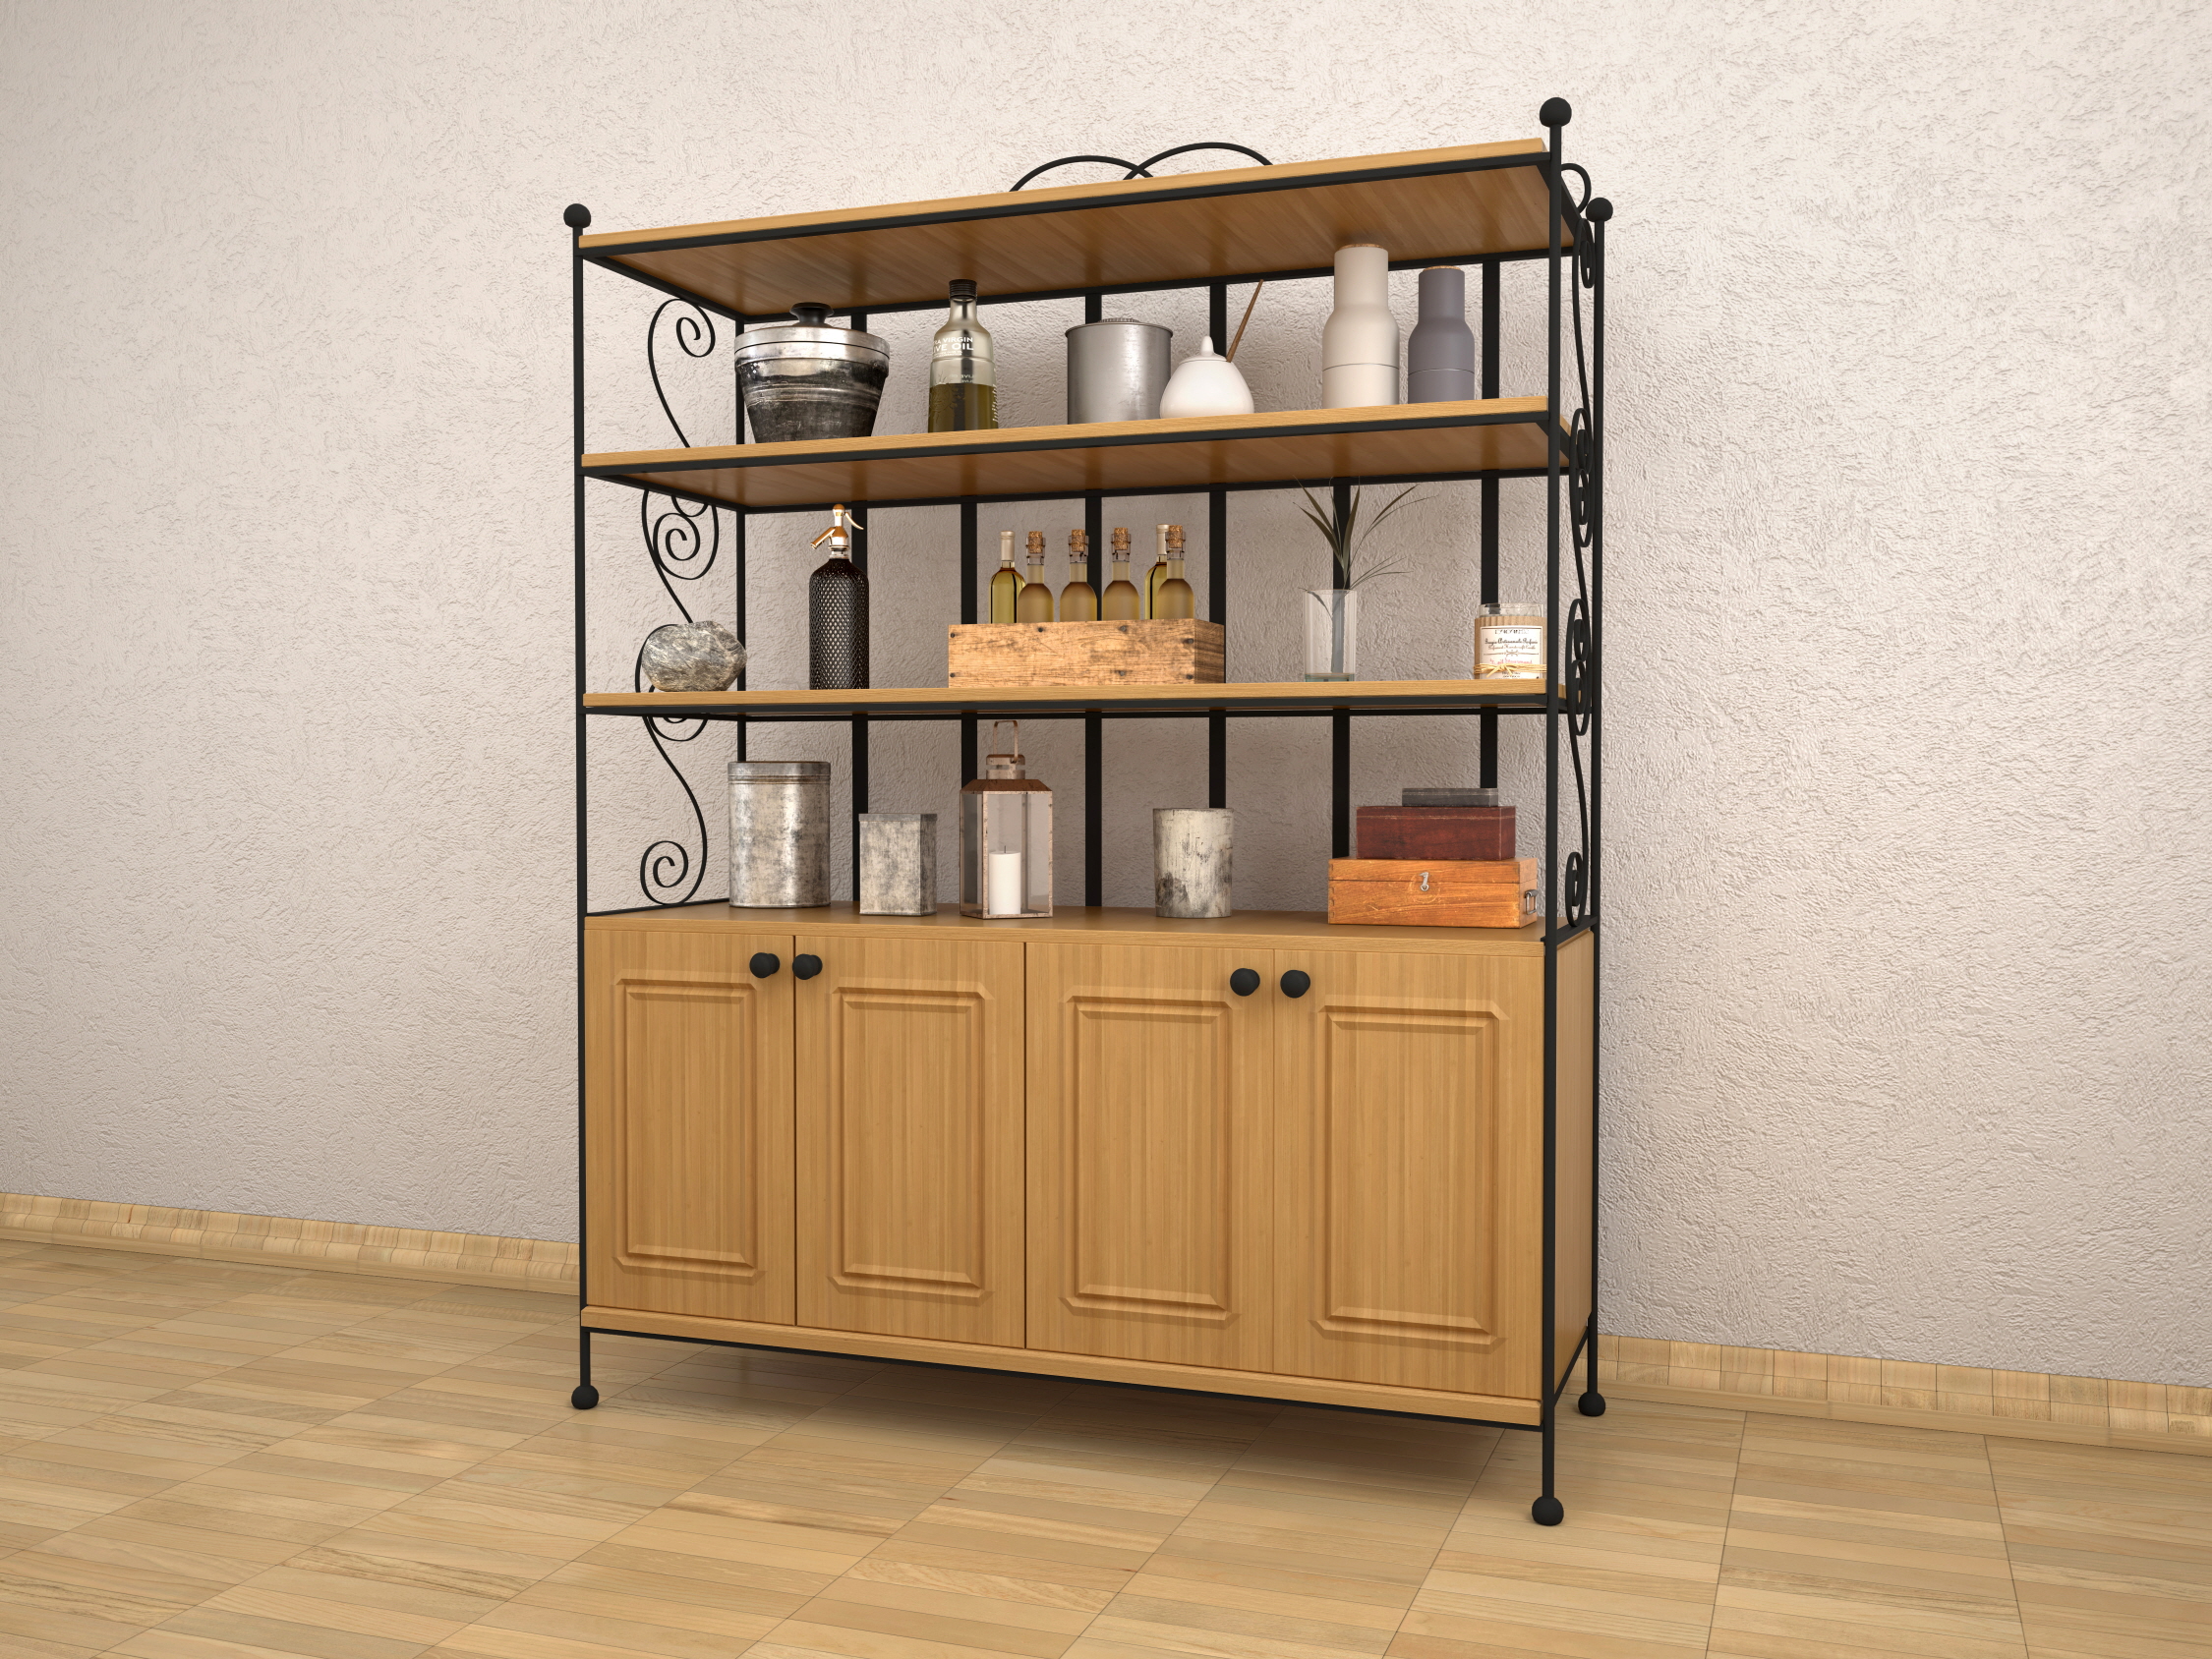 Enhance your small kitchen with a stylish, space-saving bar cabinet.